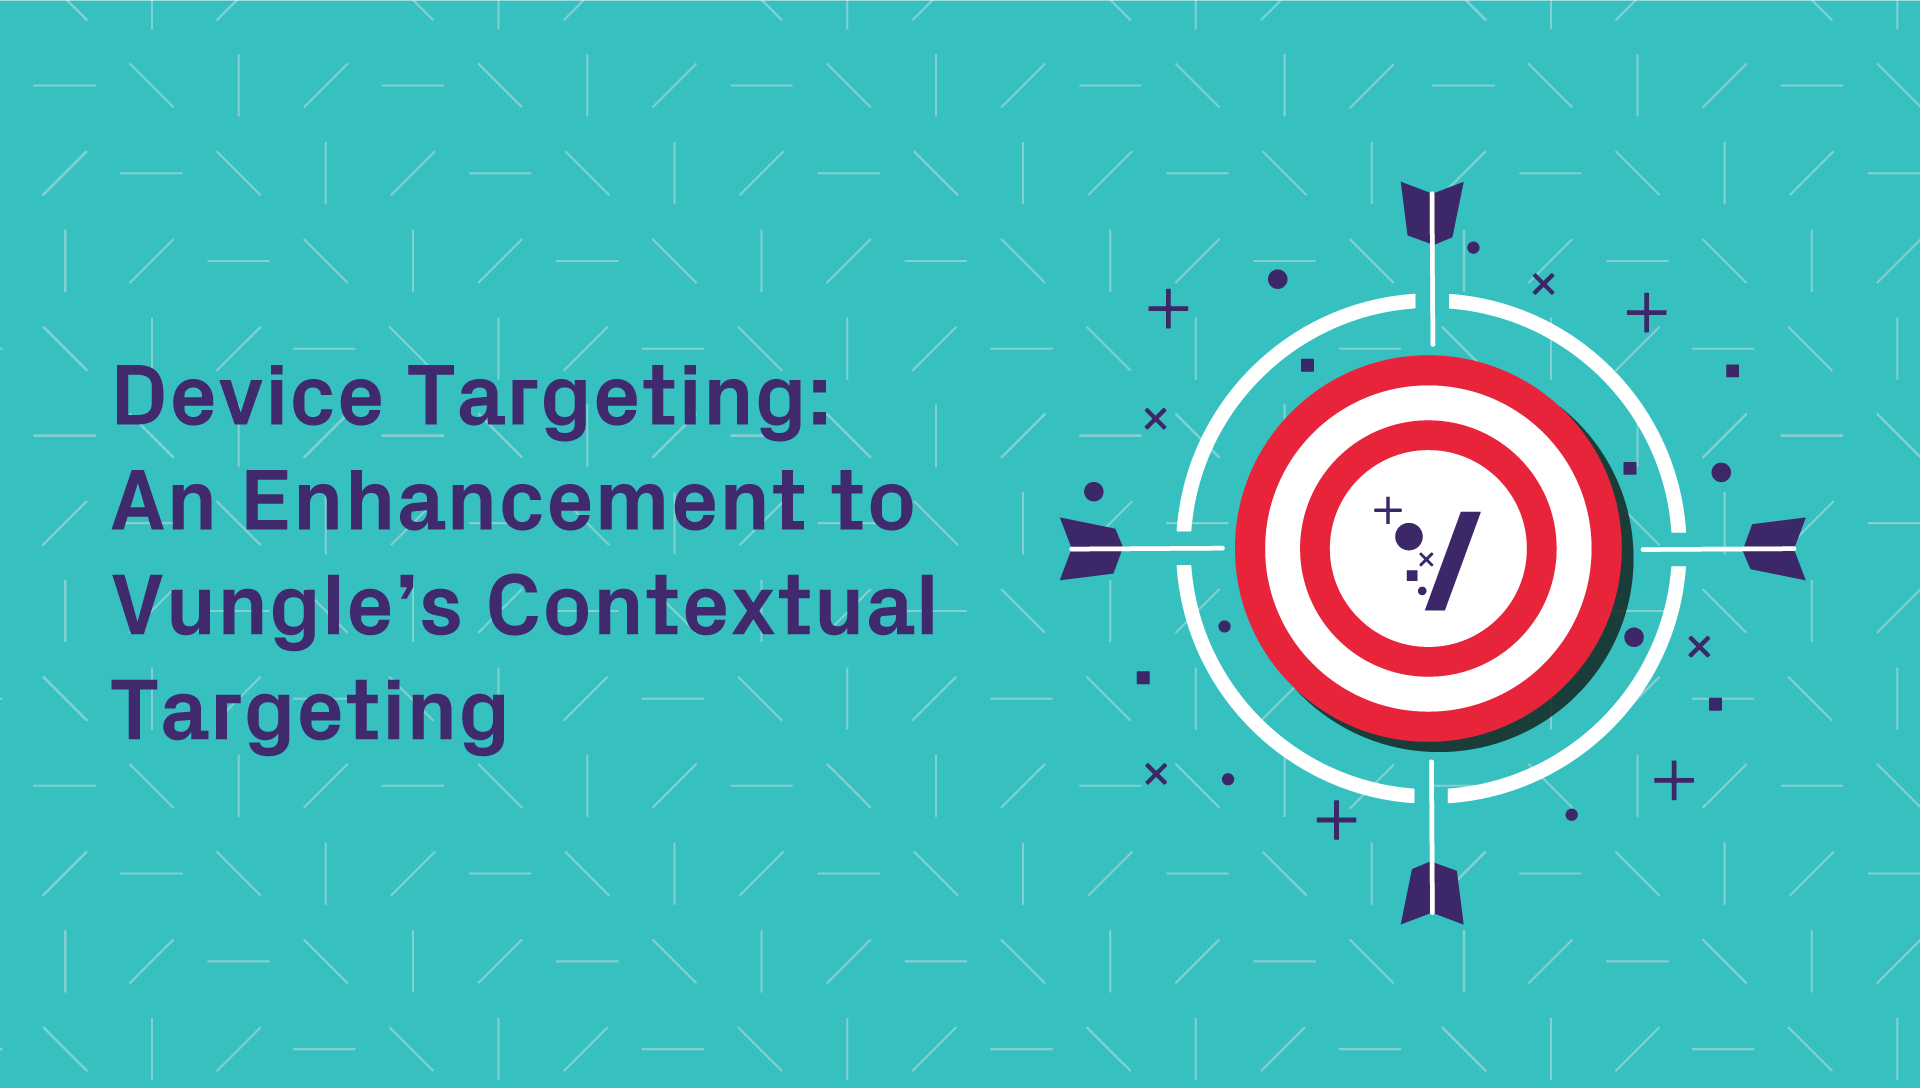 Device Targeting: An Enhancement to Vungle’s Contextual Targeting